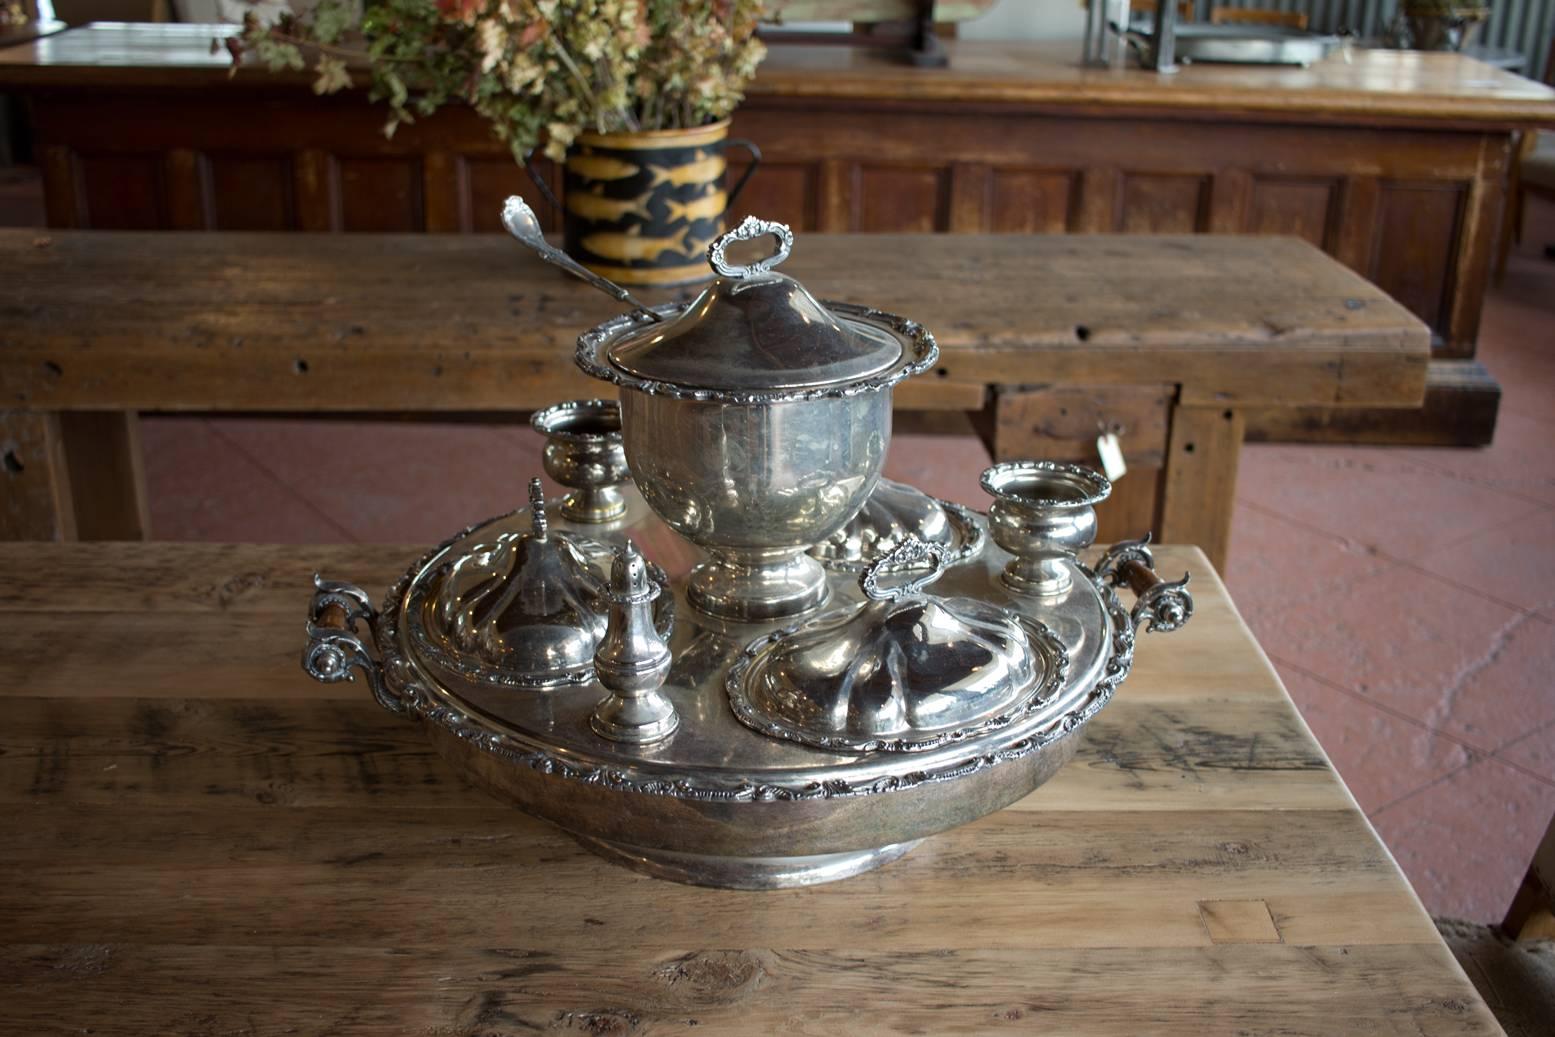 This is a beautiful complete antique English silver plated revolving supper set that still has its original ladle and condiment pots. It has lovely turned handles. Perfect holiday table piece!